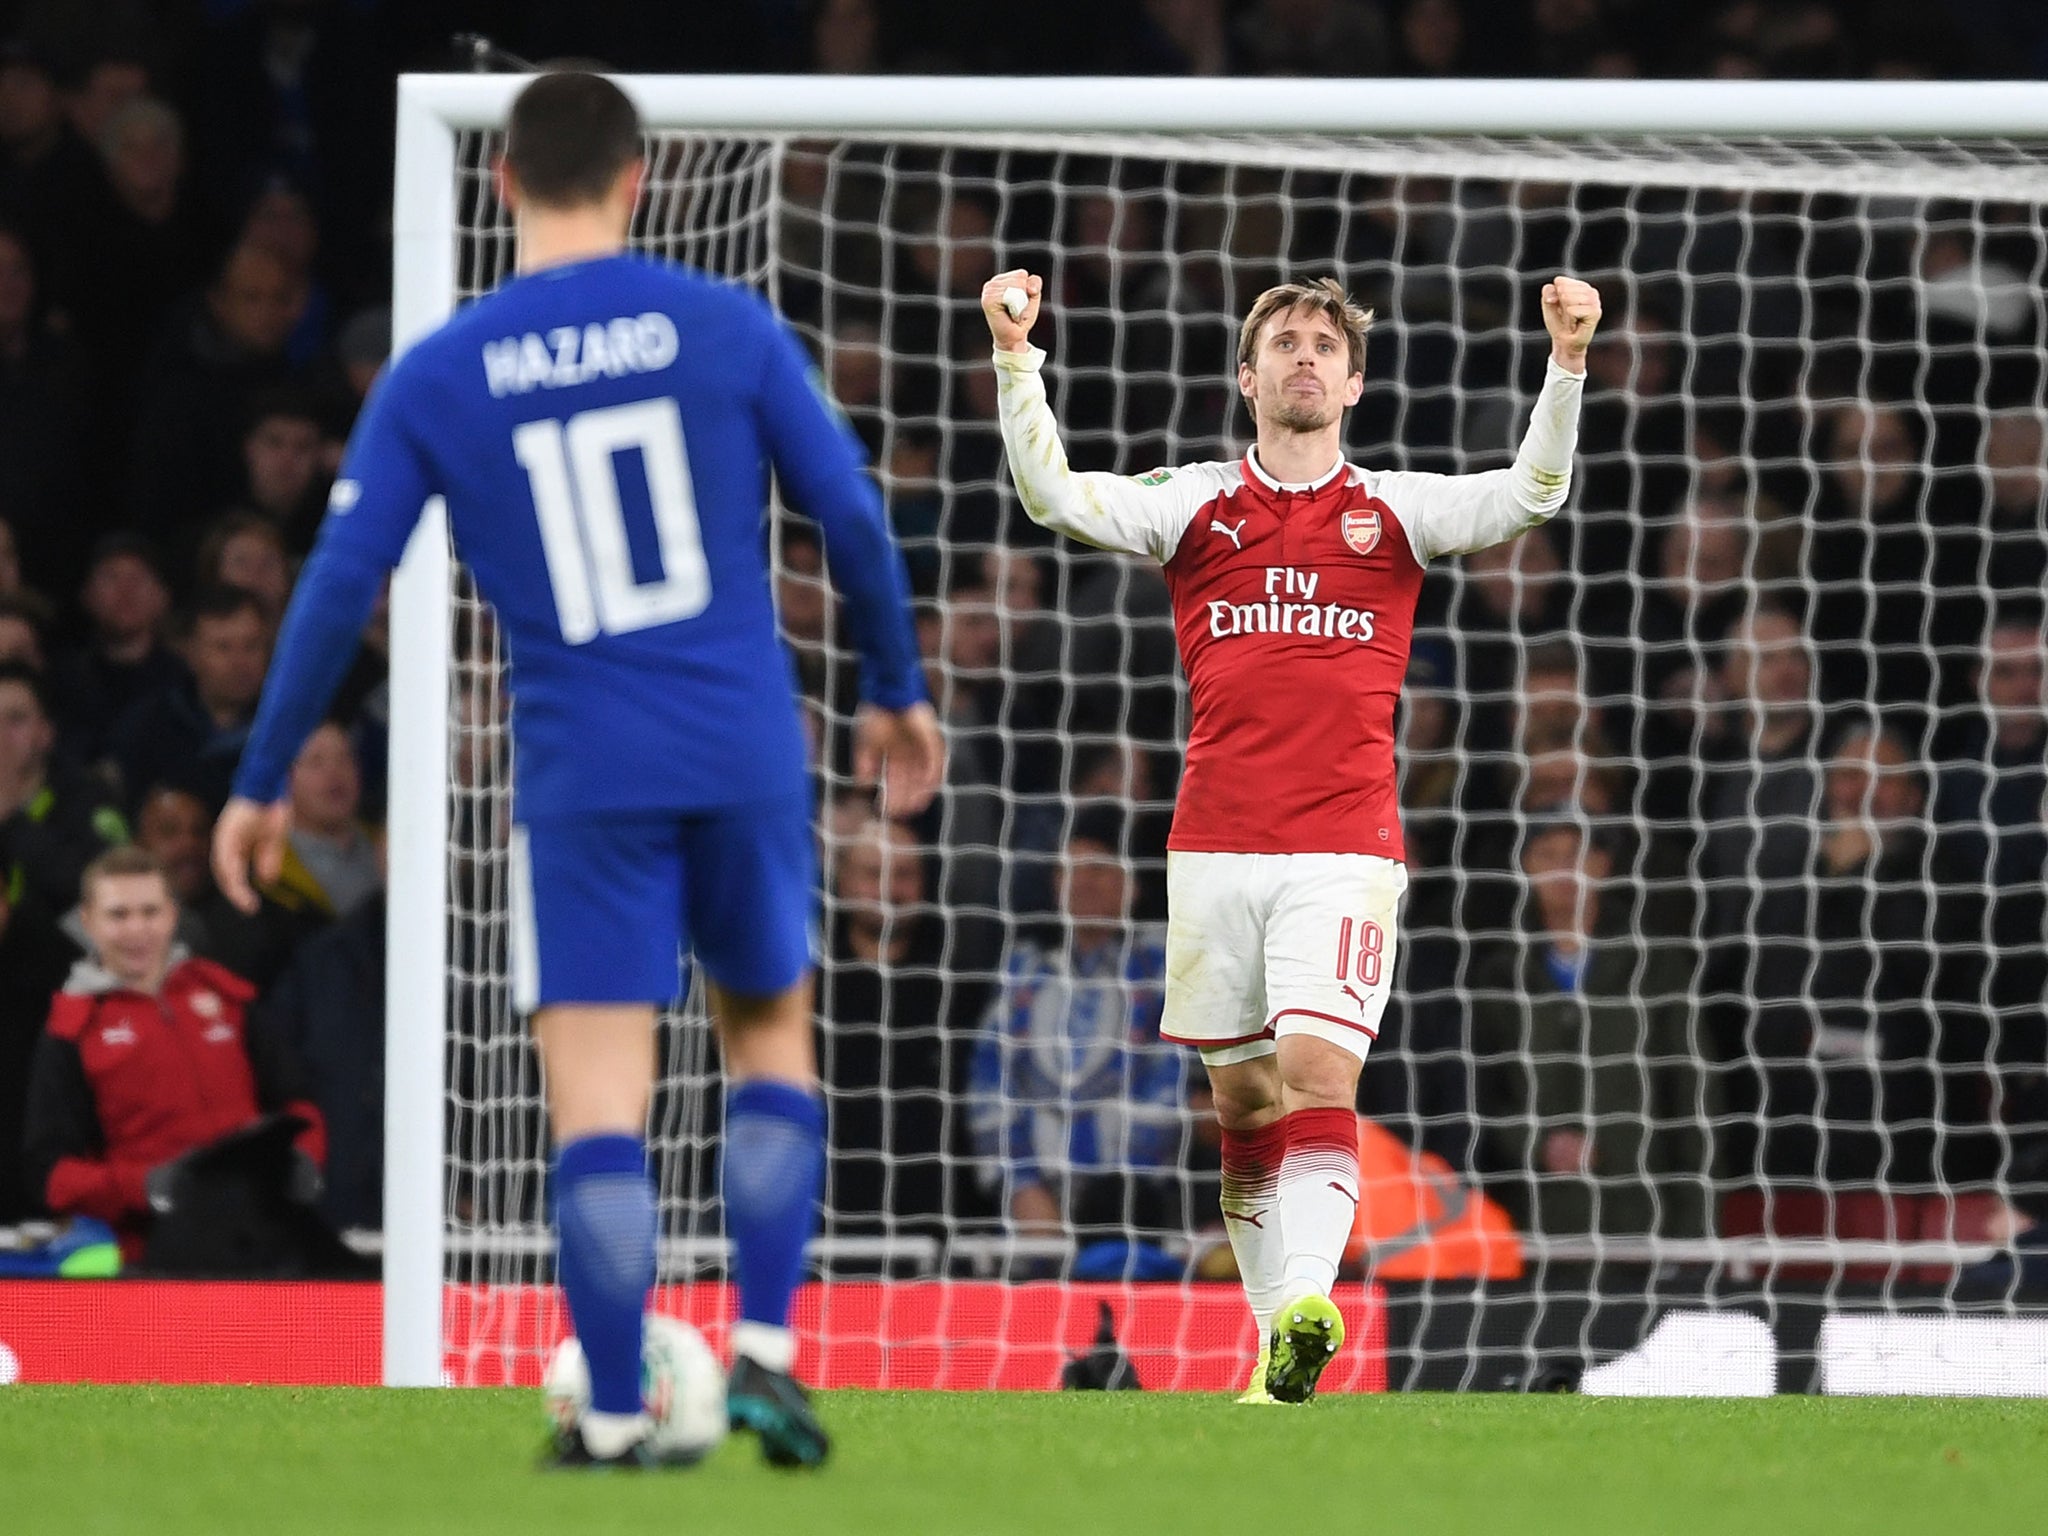 Nahco Monreal, Arsenal's unlikely but indispensable hero, celebrates the 2-1 victory over Chelsea